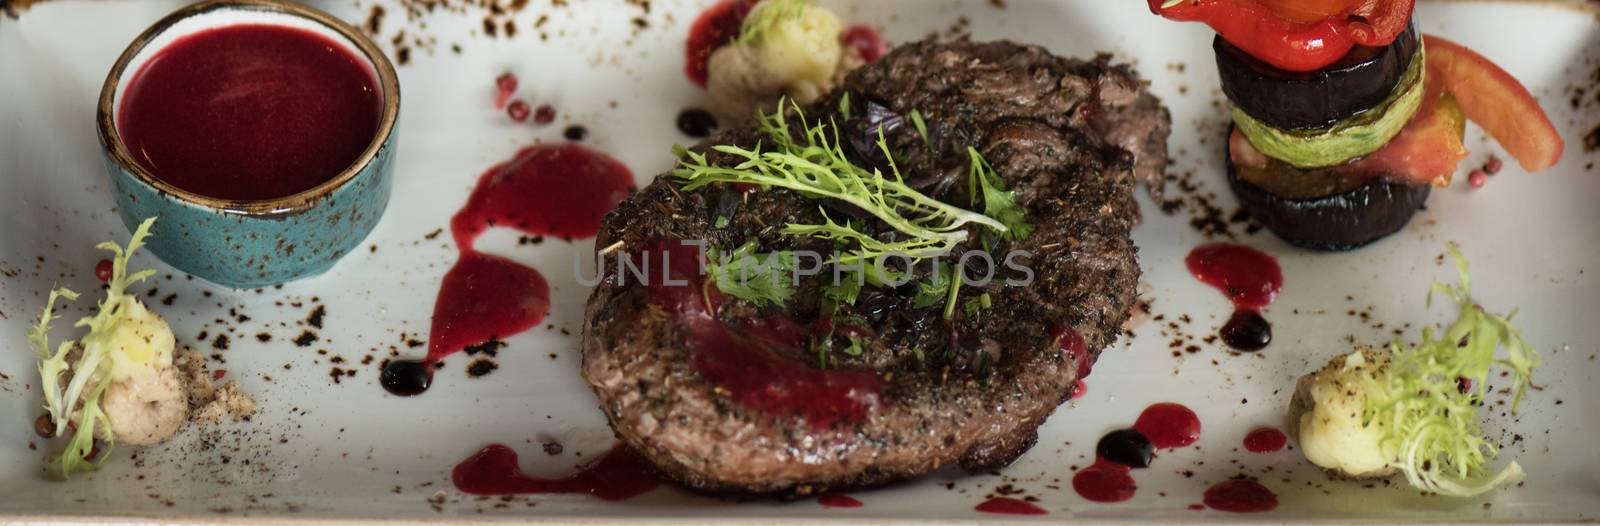 grilled beef steak with herbs vegetables and sauce